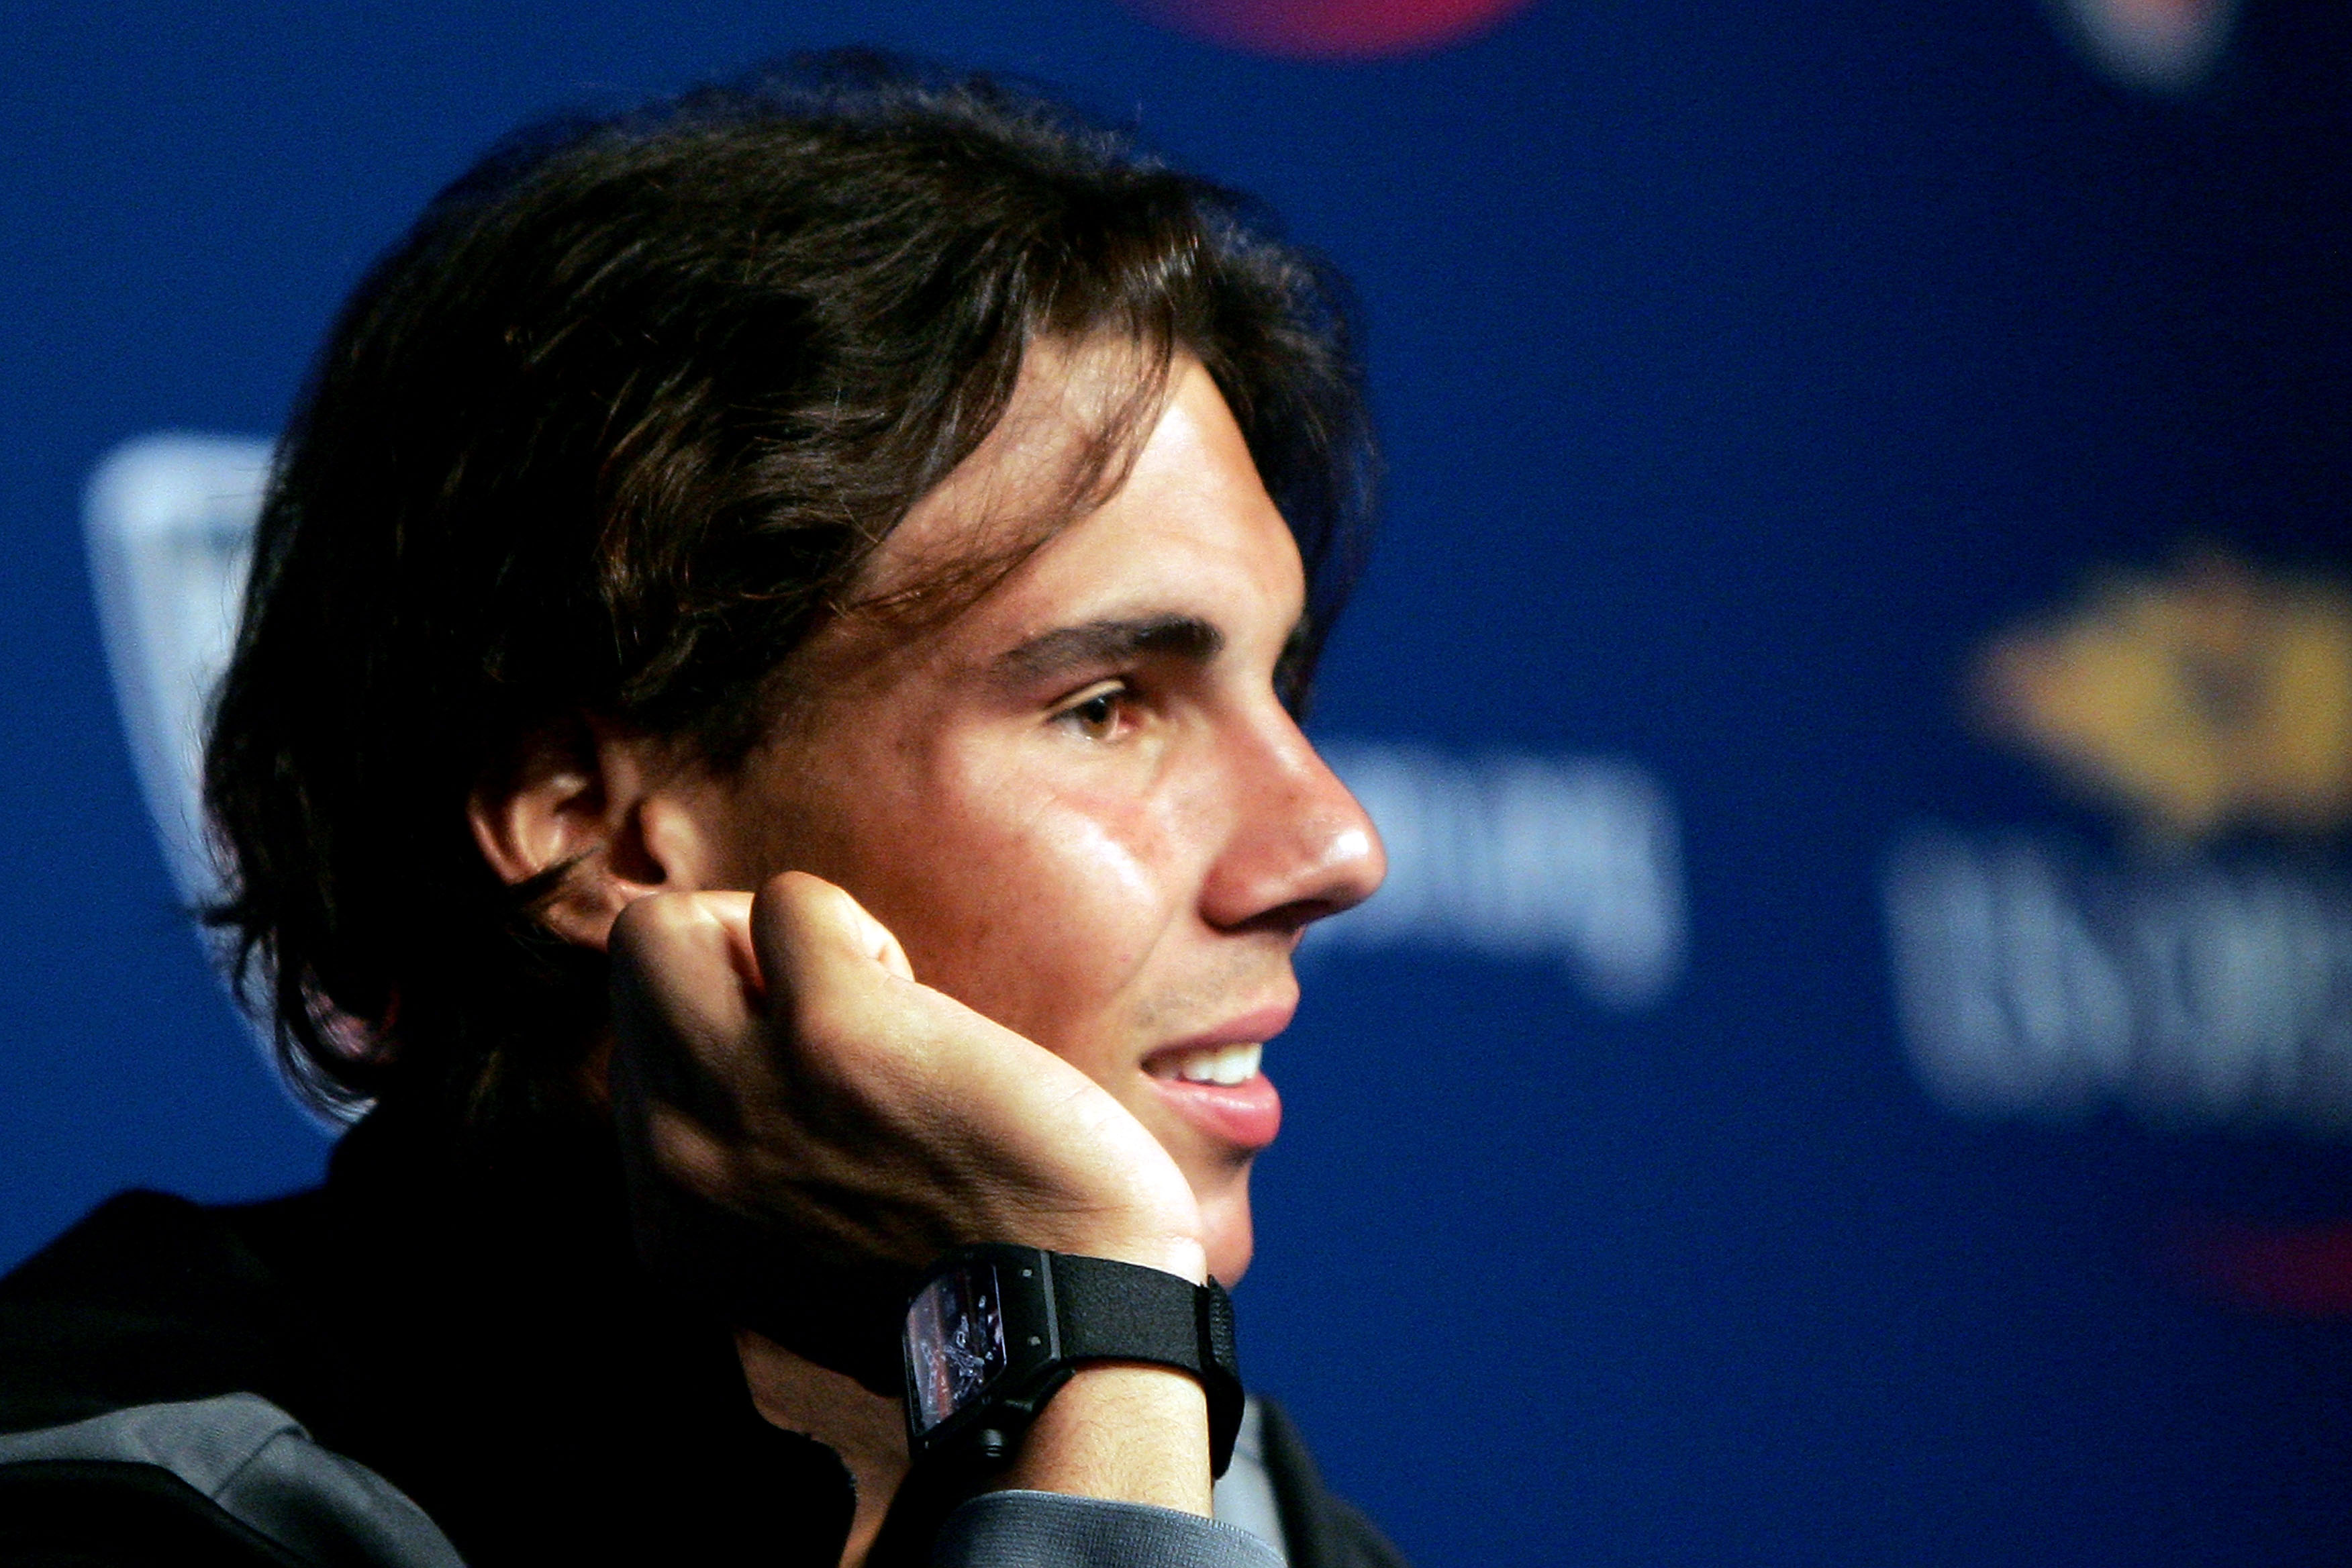 NEW YORK - AUGUST 28:  Rafael Nadal of Spain talks to the media during a press conference held on Arthur Ashe Kids' Day prior to the start of the 2010 U.S. Open at the USTA Billie Jean King National Tennis Center on August 28, 2010 in the Flushing neighbo